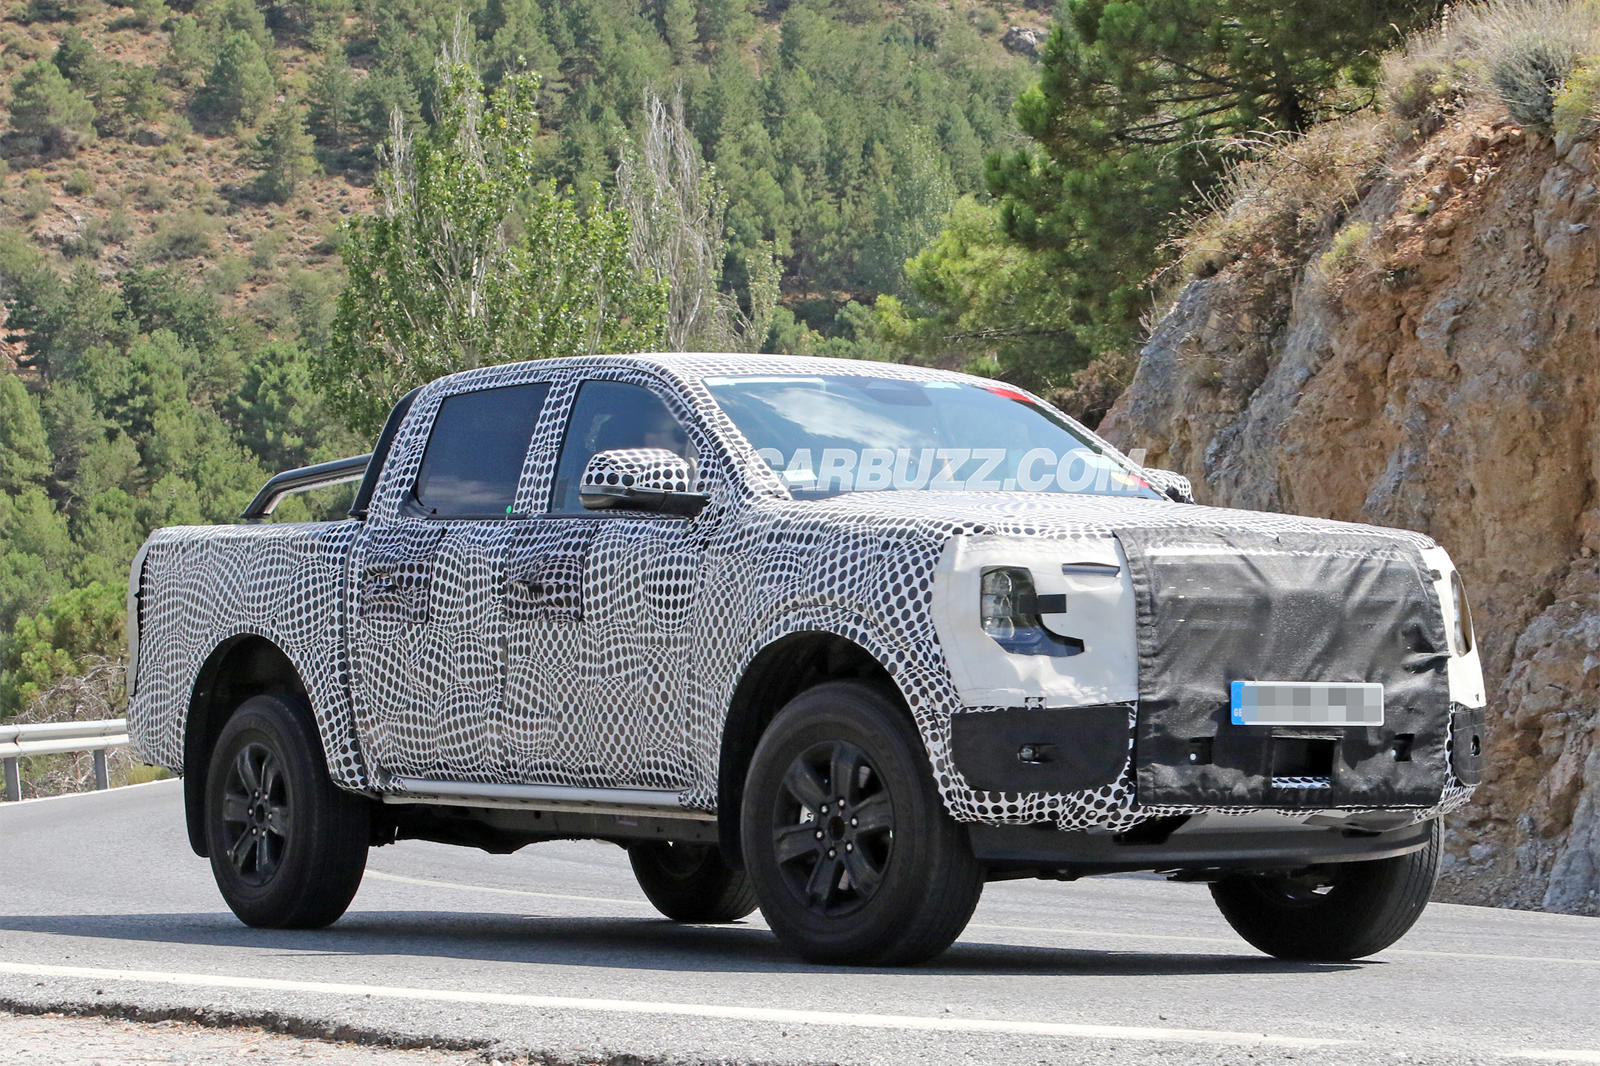 Next-Generation Ford Ranger Shows Its Face With Hybrid Technology